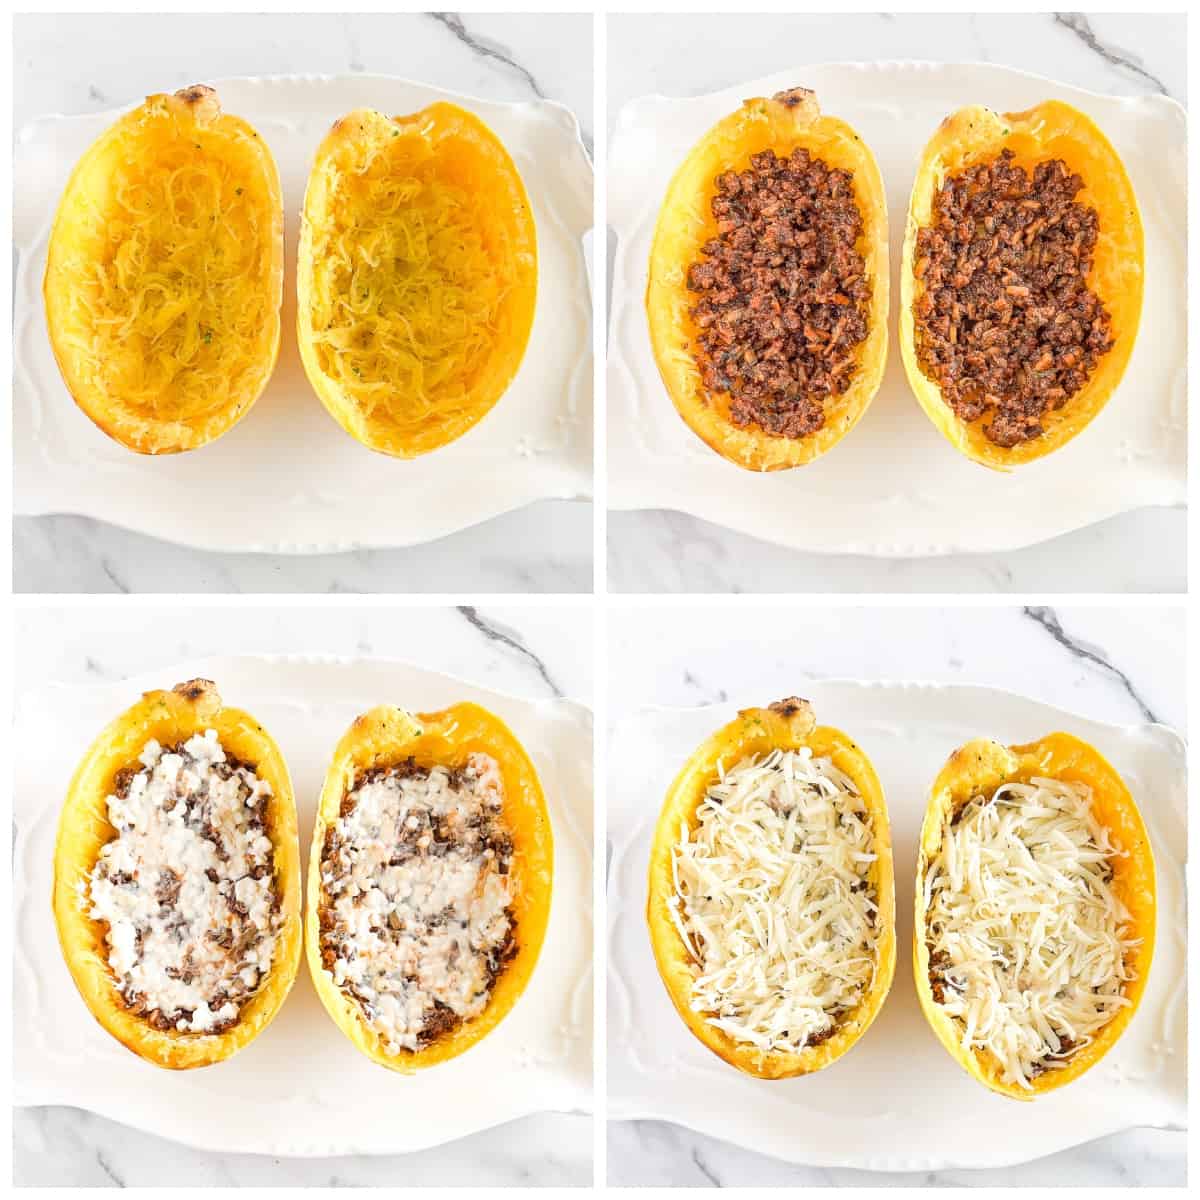 After the squash and meat are ready, it's time to assemble our spaghetti squash lasagna boats.